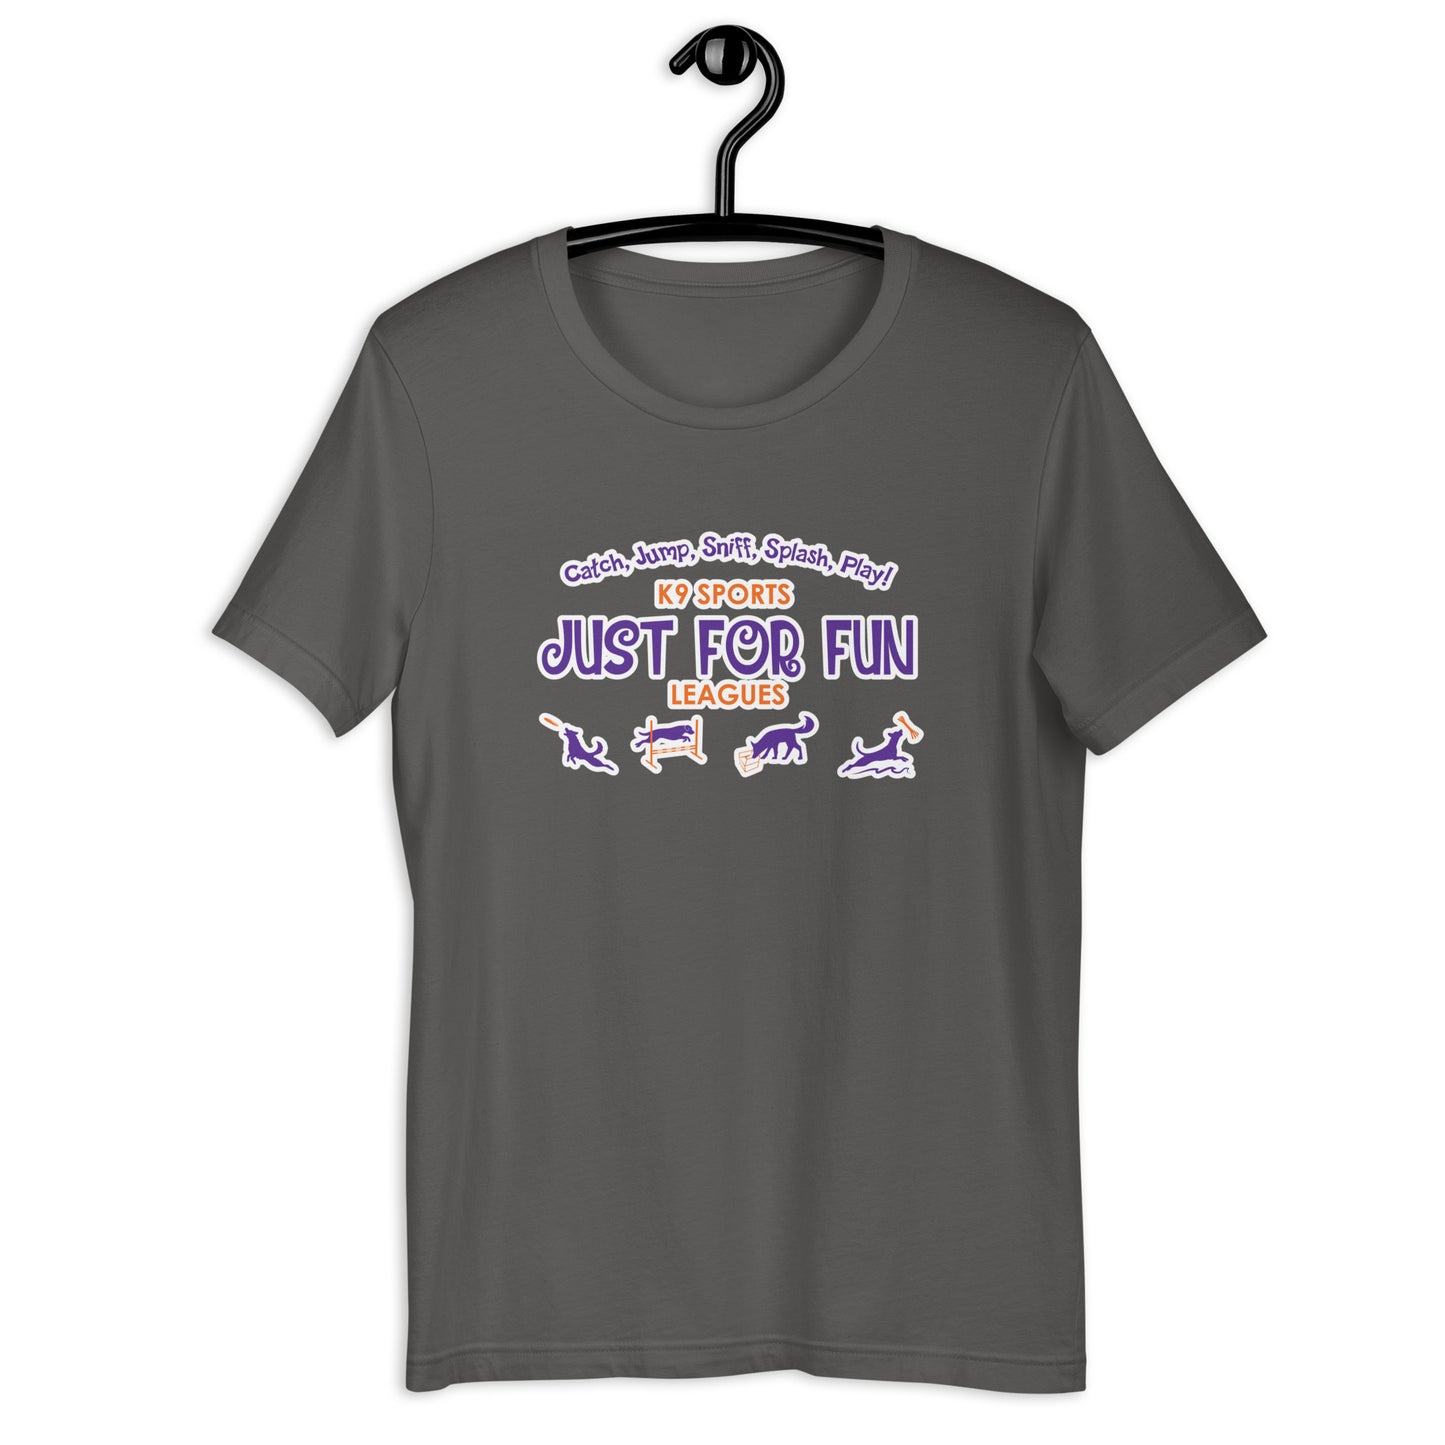 JUST FOR FUN - OUTLINED - Unisex t-shirt